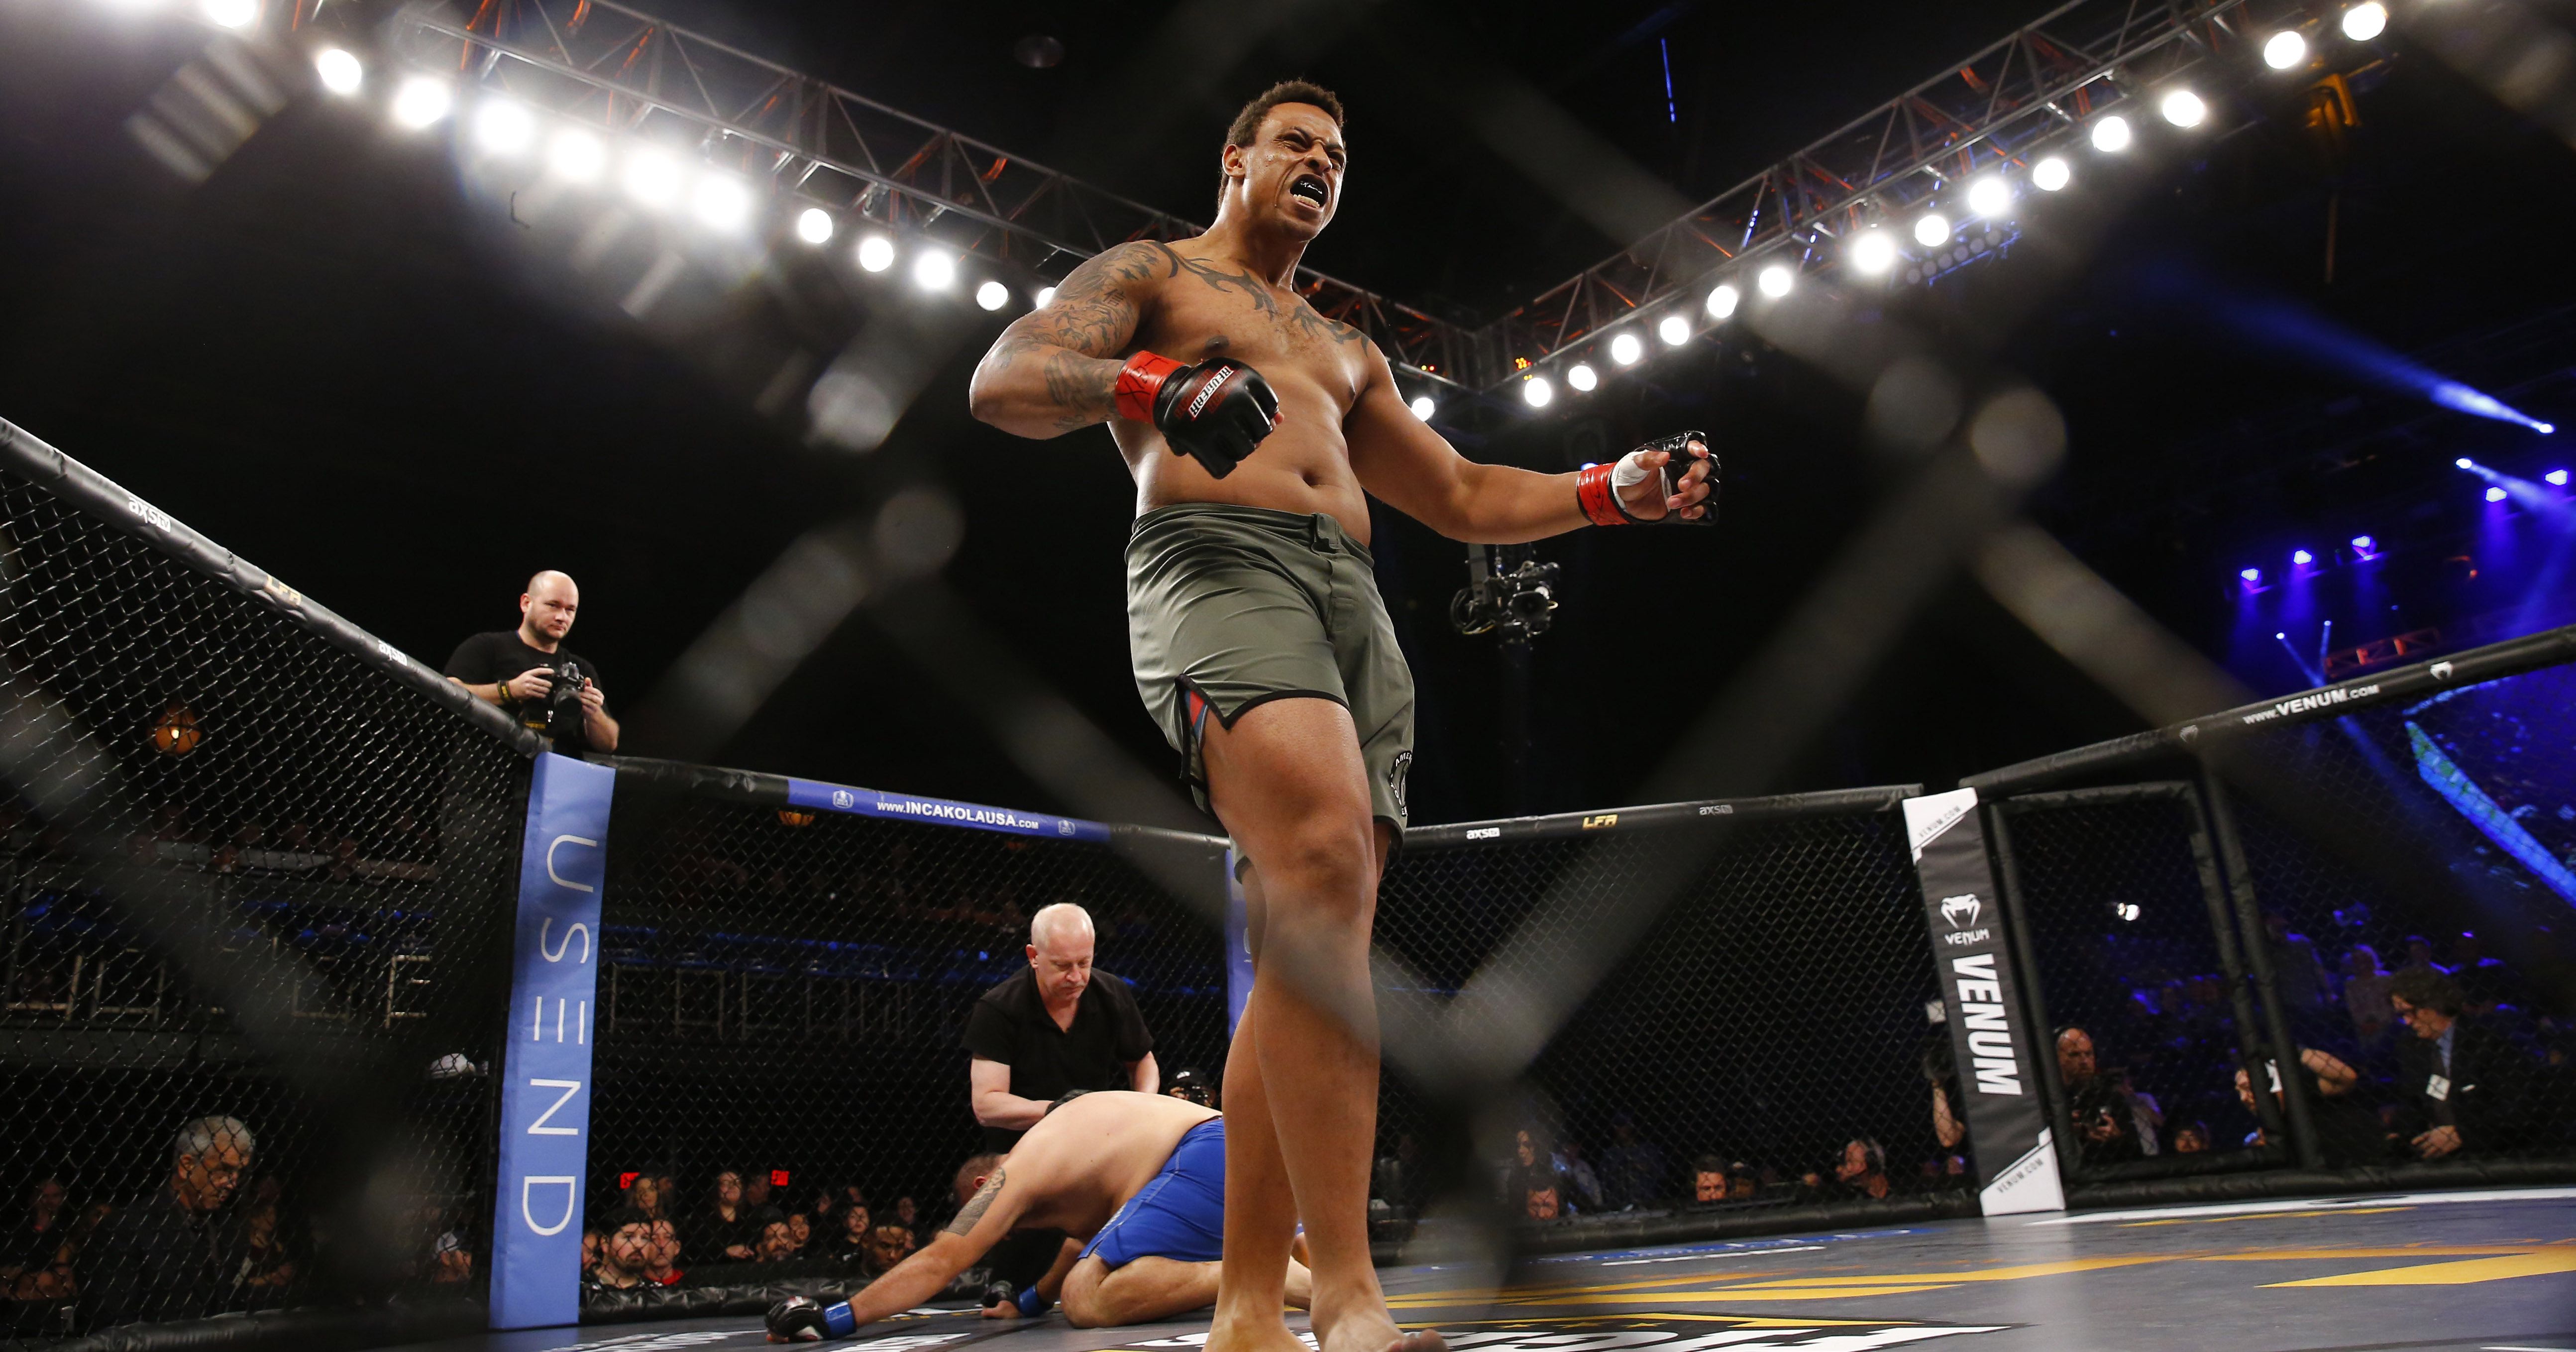 Ex-Cowboy Greg Hardy wins MMA fight in 14.53 seconds